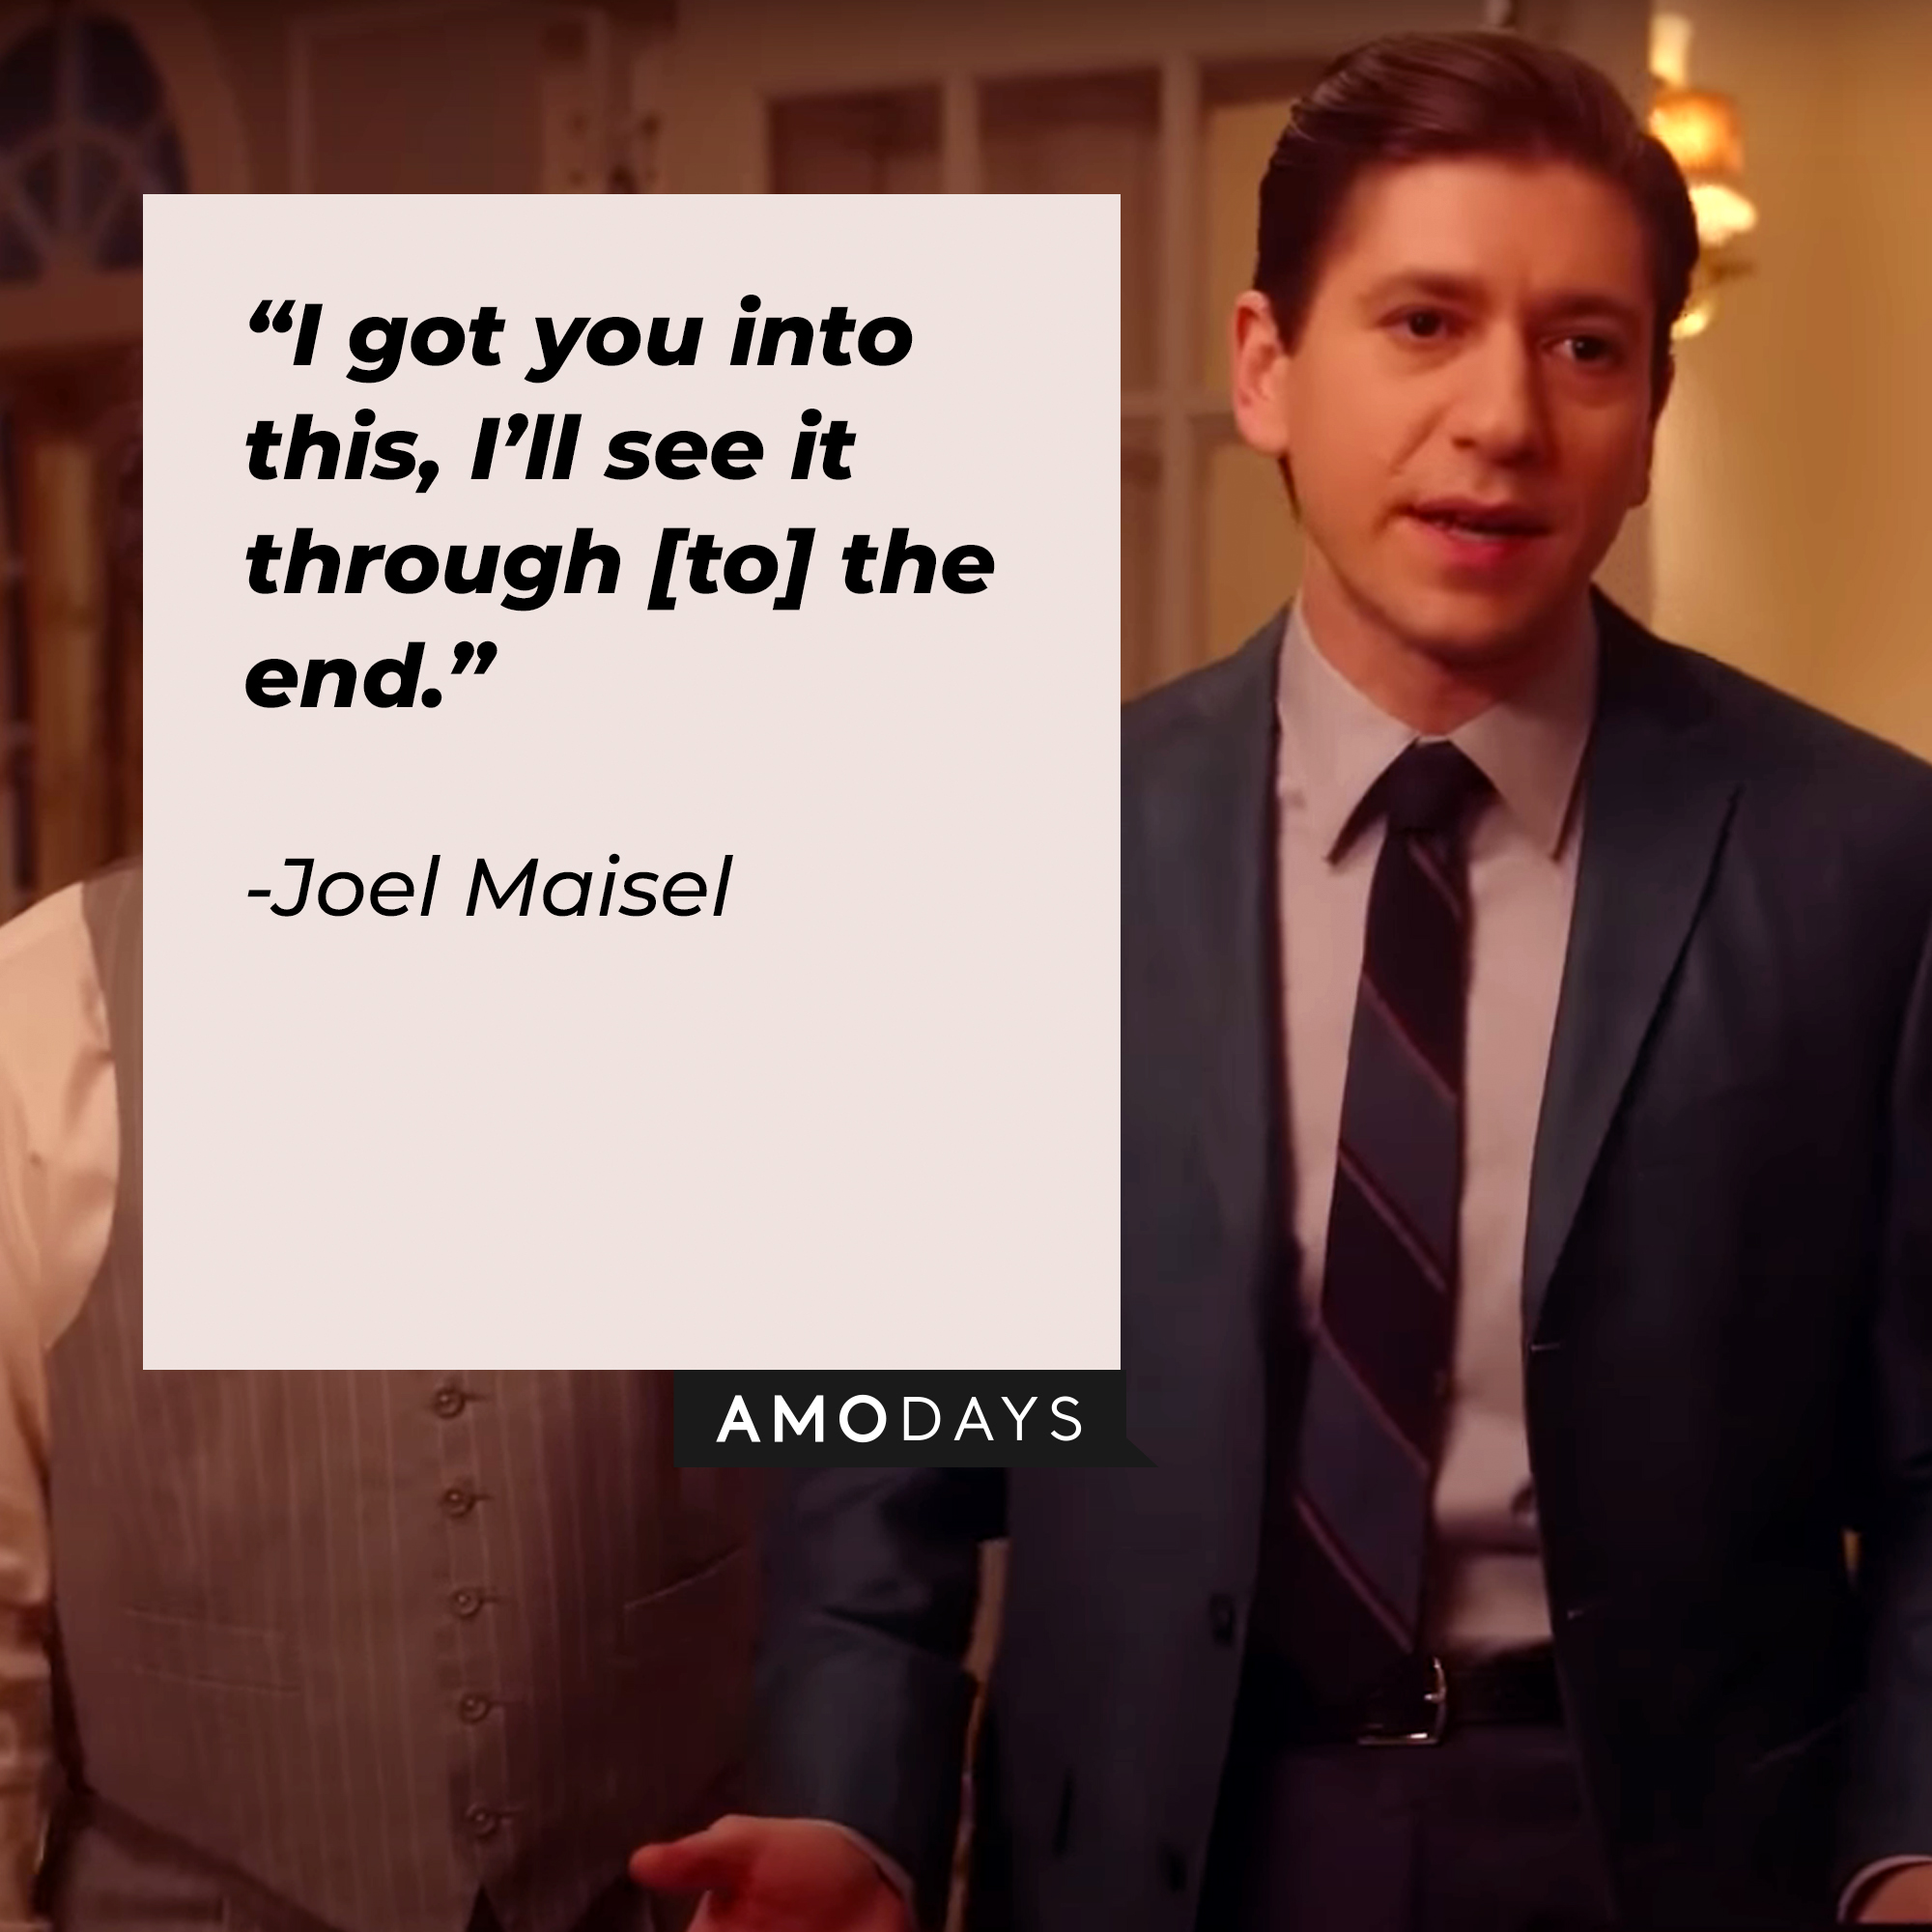 Joel Maisel with his quote: “I got you into this, I’ll see it through [to] the end.” | Source: youtube.com/PrimeVideoUK